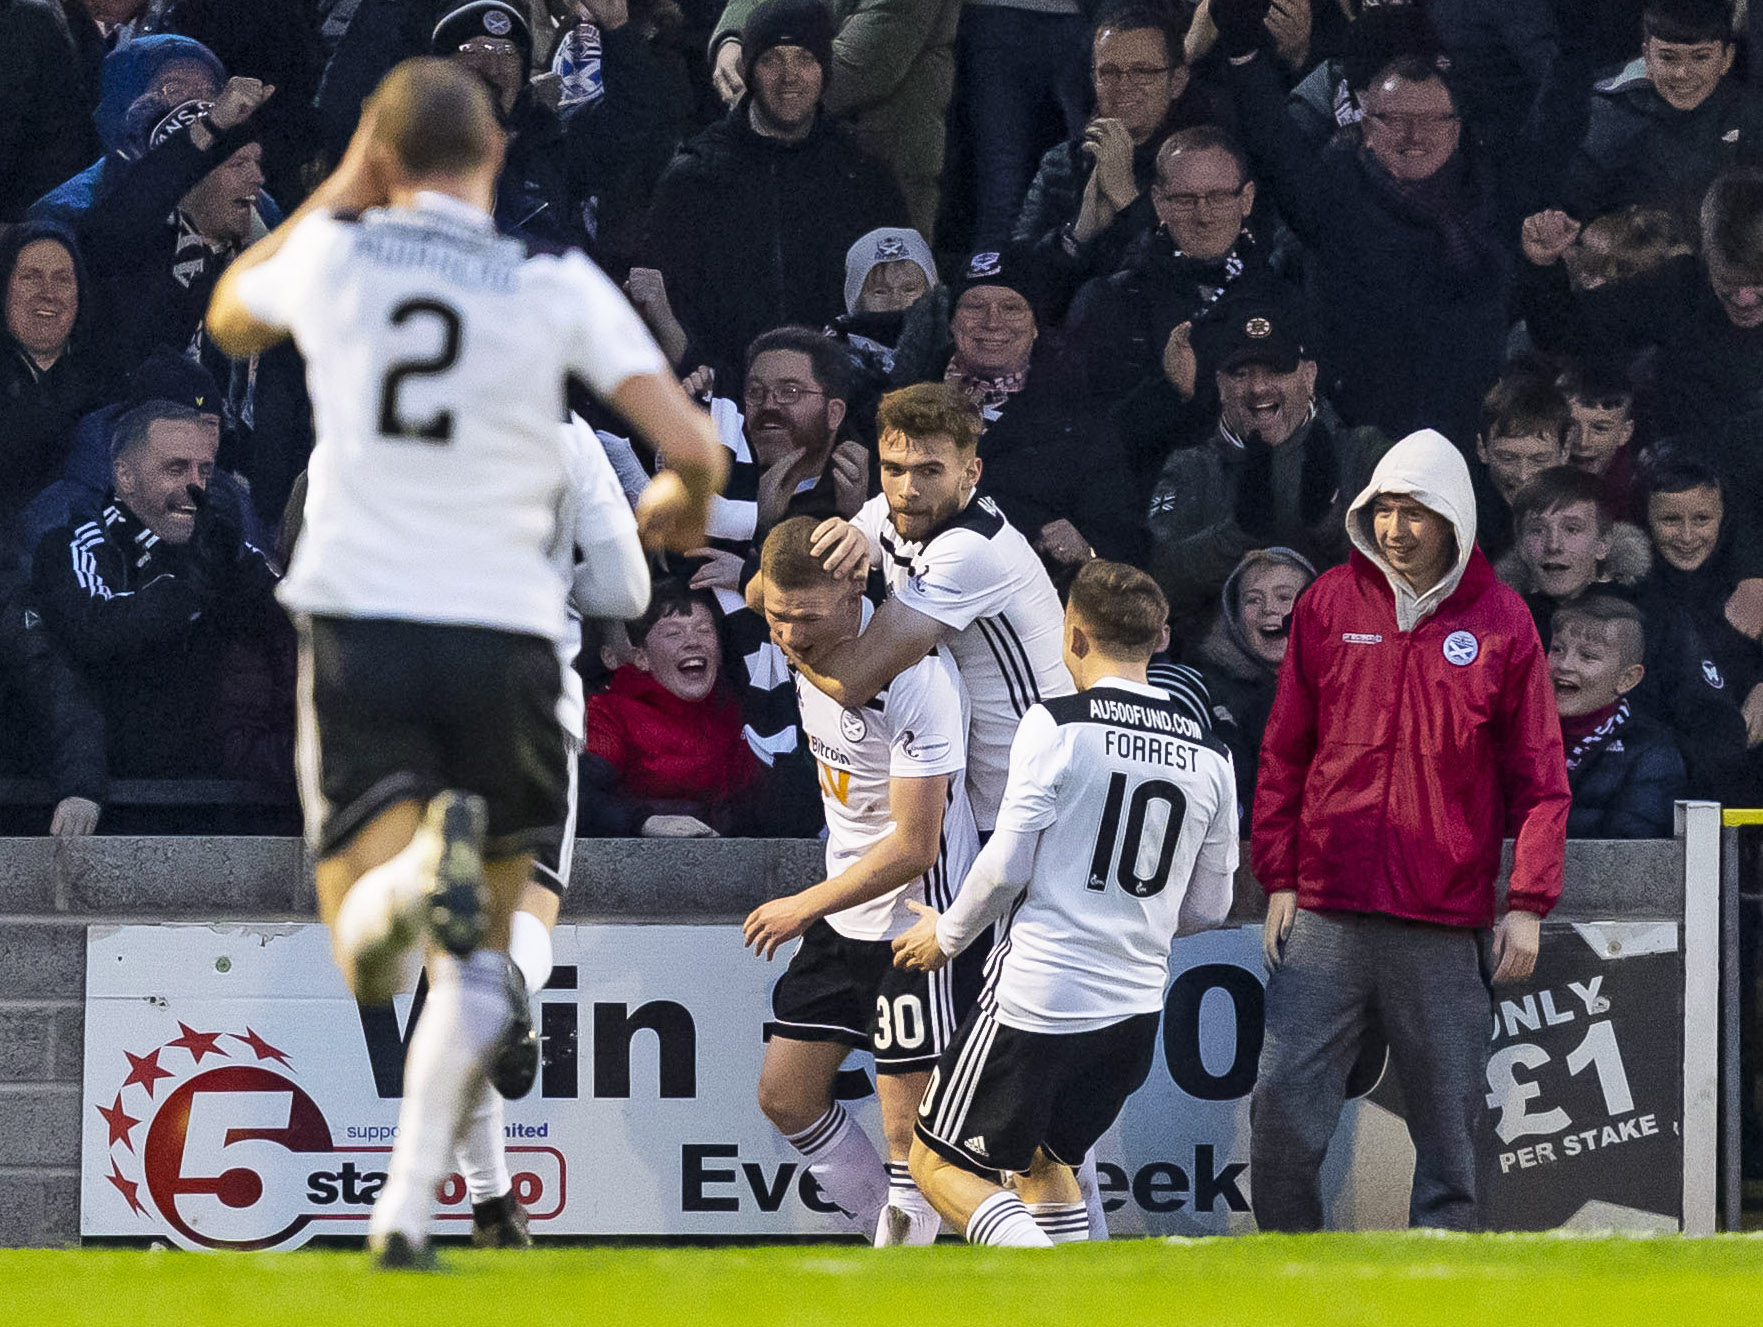 Stephen Kelly is mobbed after his goal.